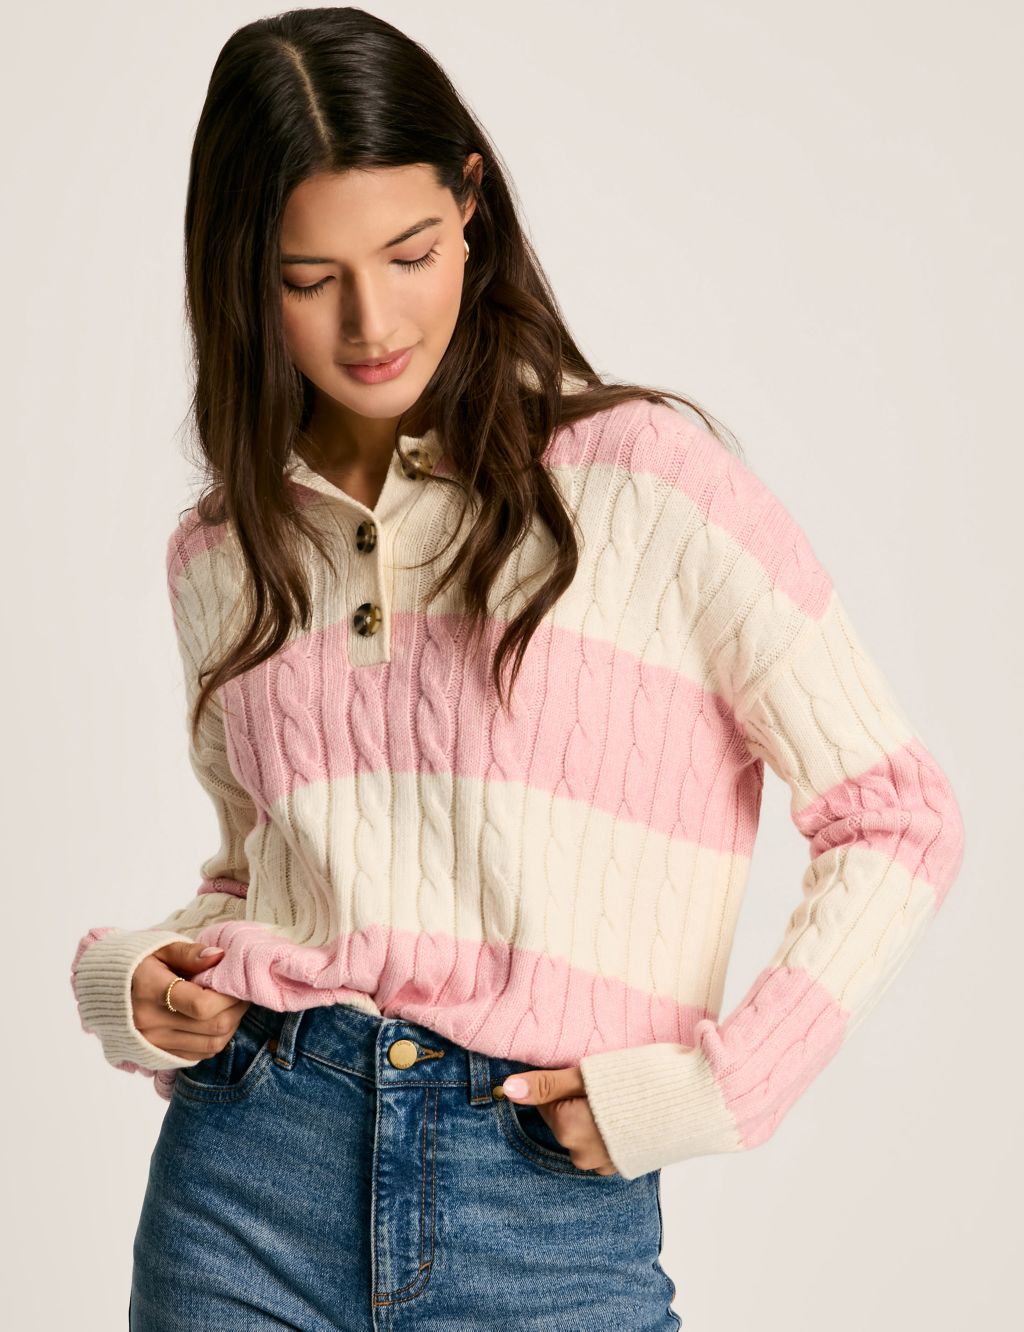 Cotton Rich Cable Knit Striped Jumper 4 of 7